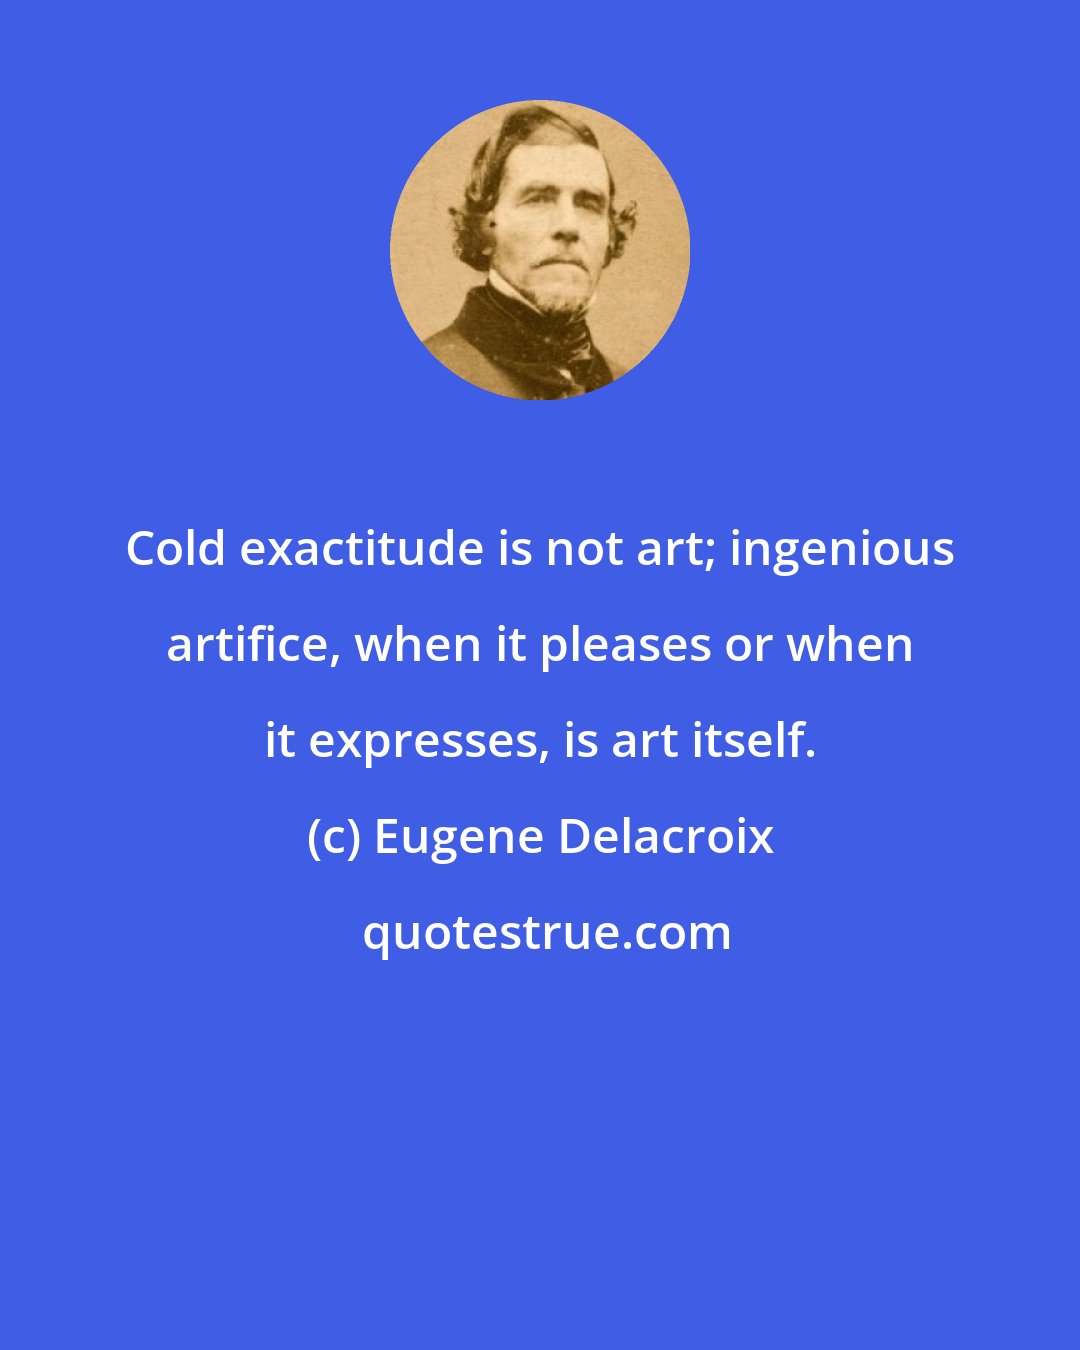 Eugene Delacroix: Cold exactitude is not art; ingenious artifice, when it pleases or when it expresses, is art itself.